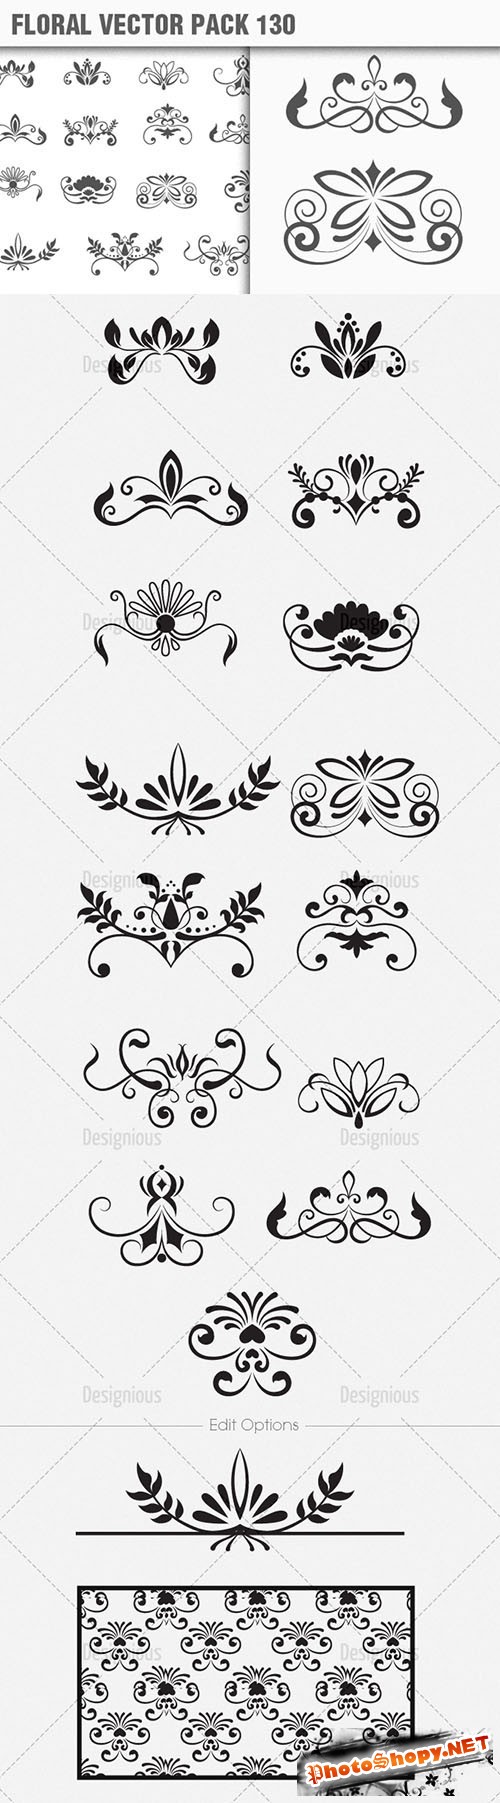 Floral Vector Pack 130